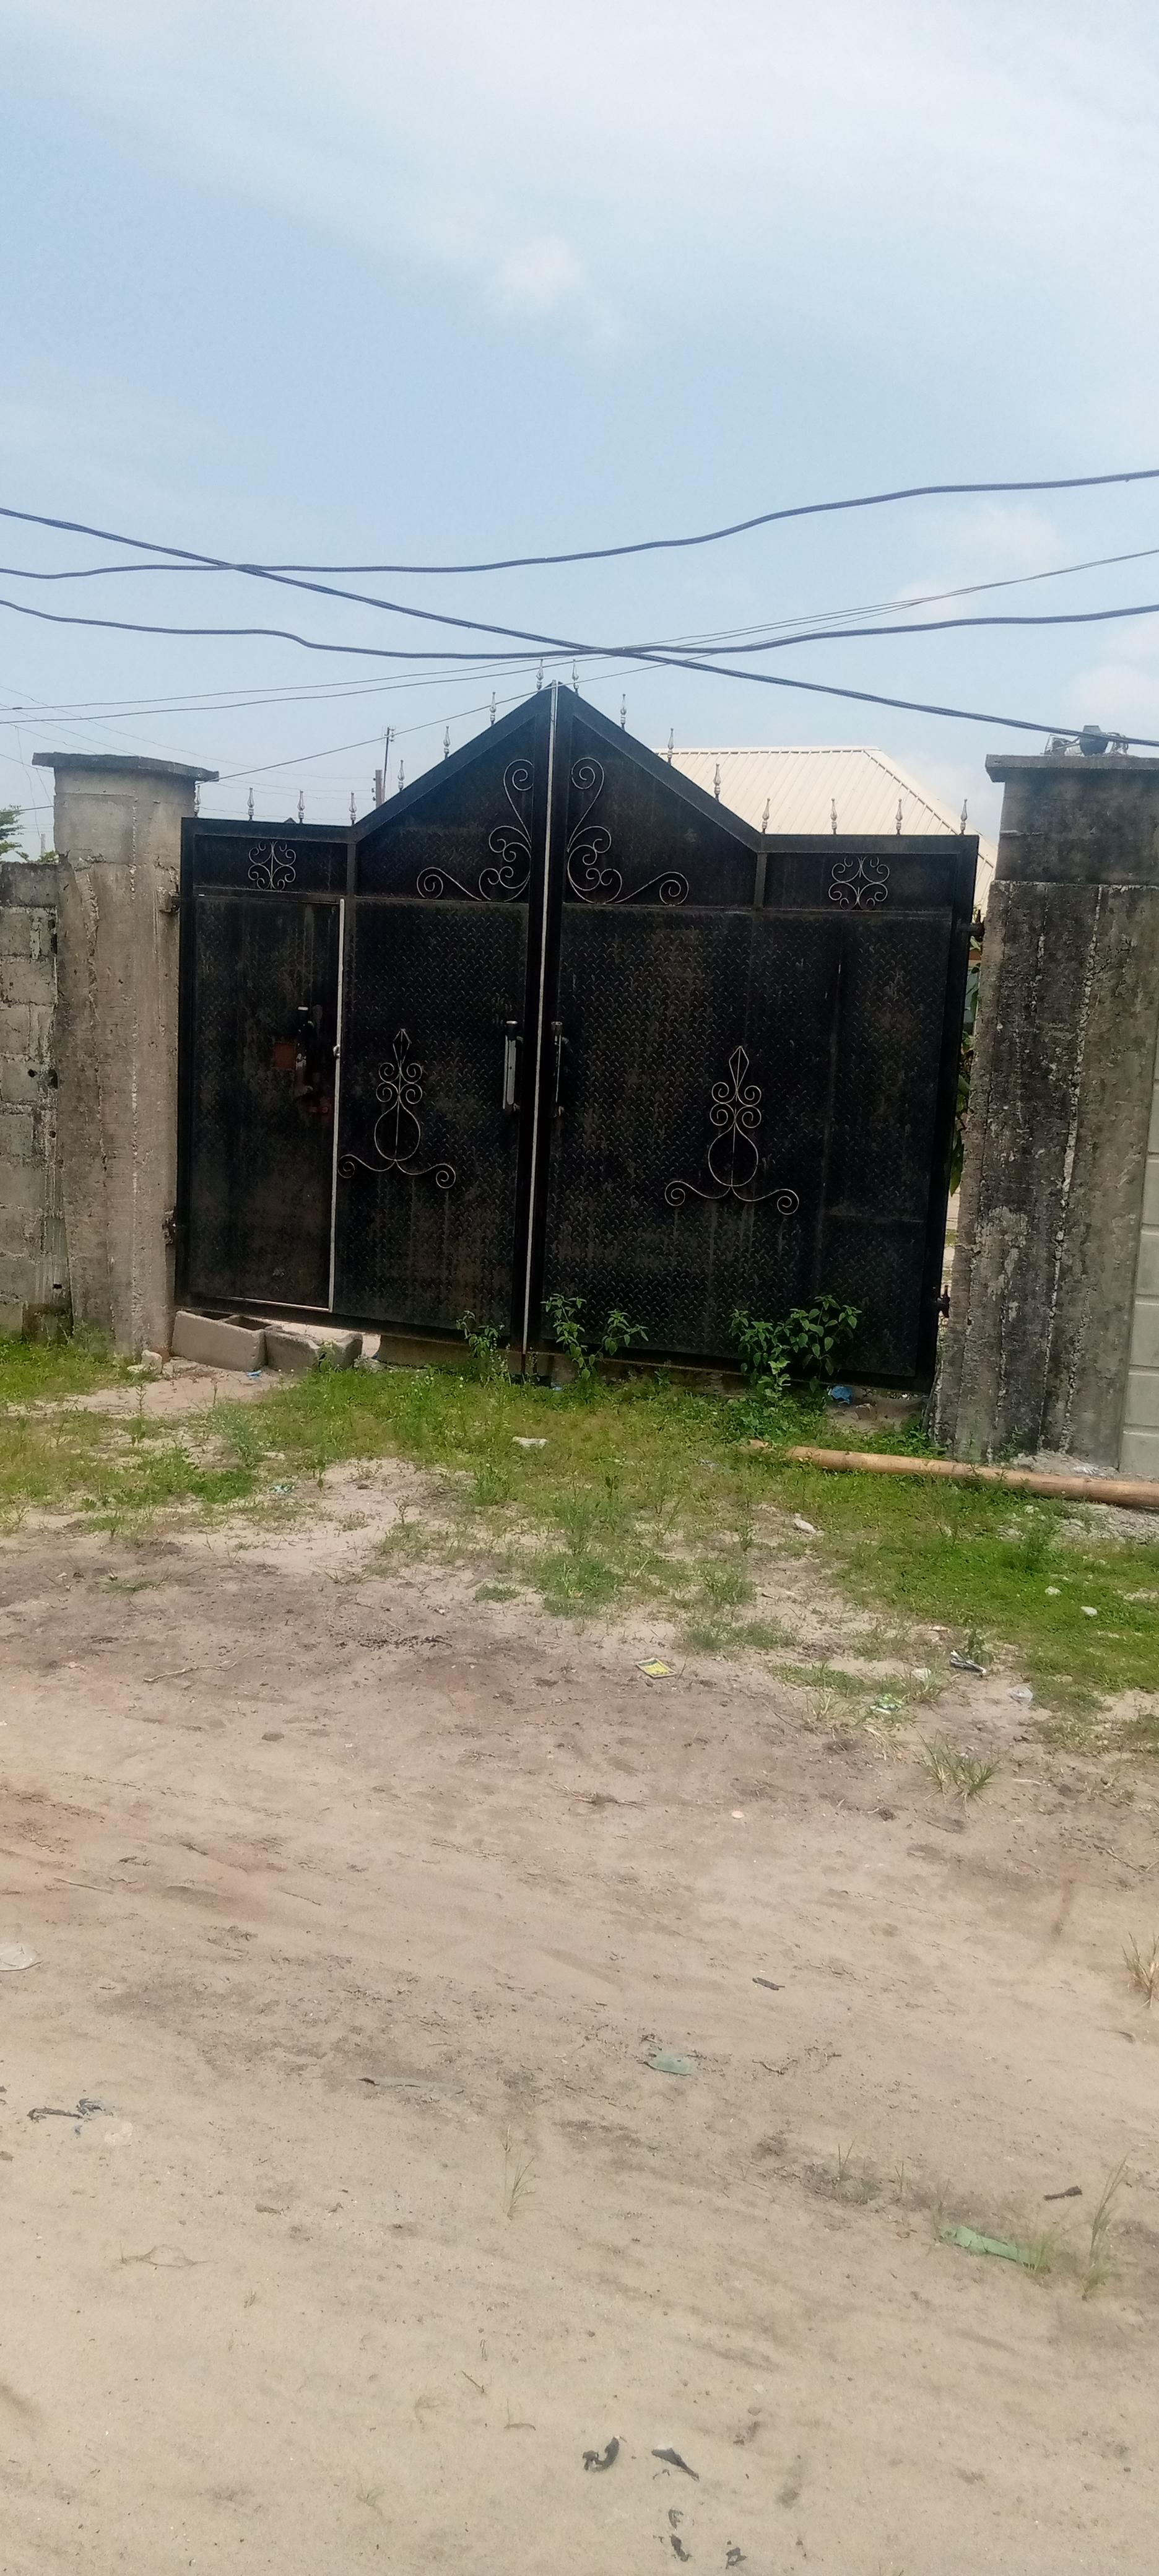 For Sale: A 2 unit of 2 bedroom bungalow at Awoyaya Ajah